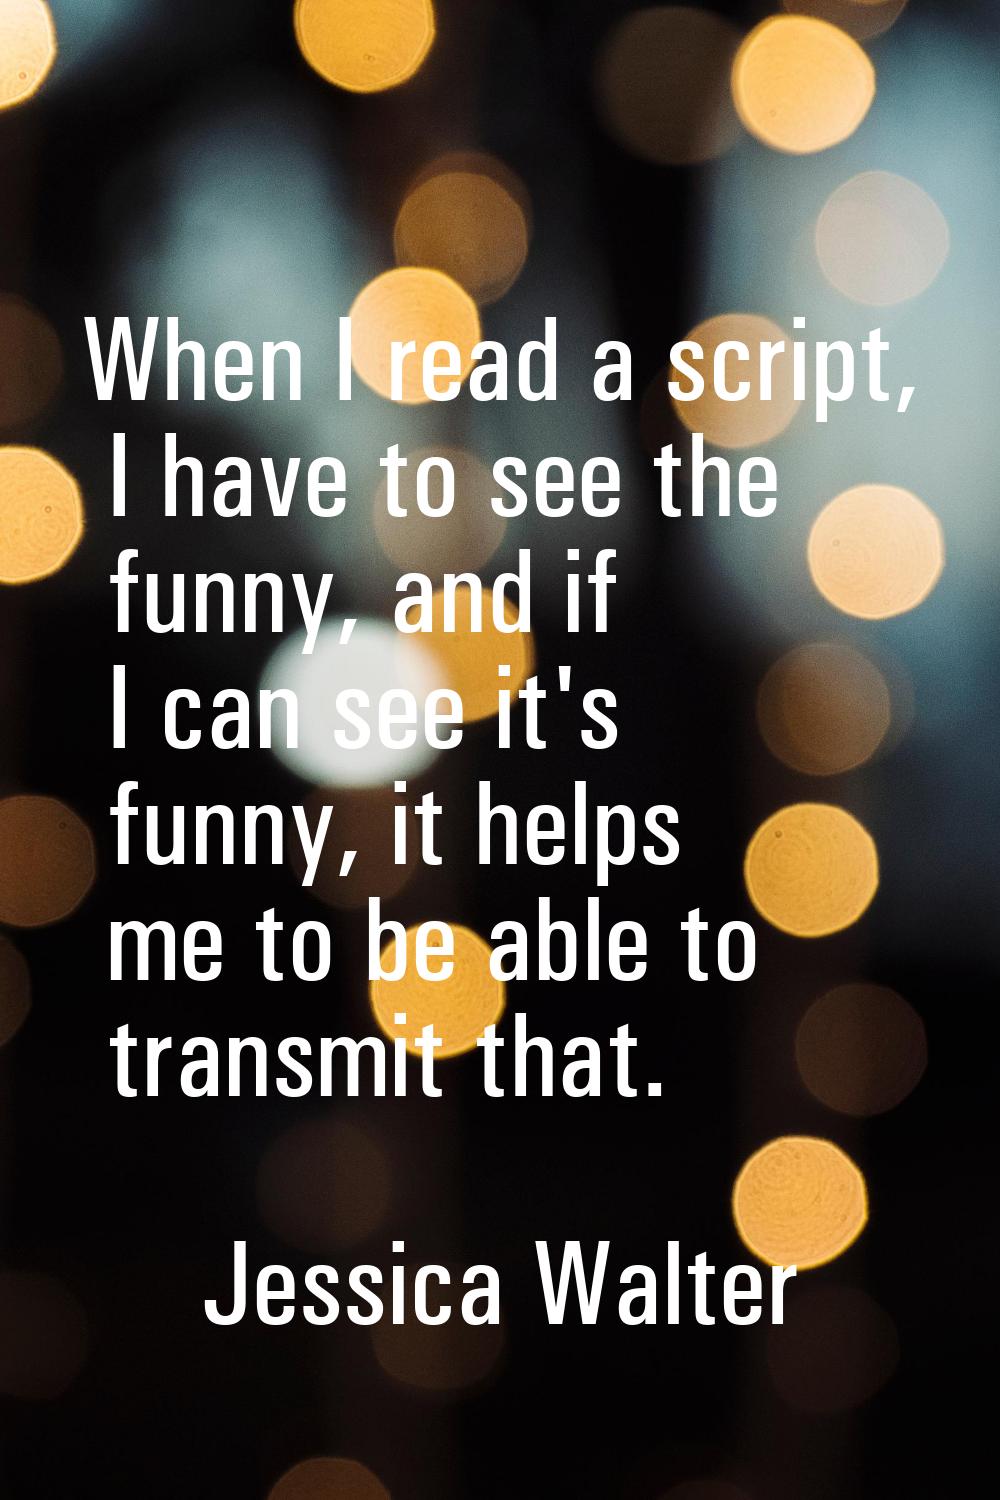 When I read a script, I have to see the funny, and if I can see it's funny, it helps me to be able 